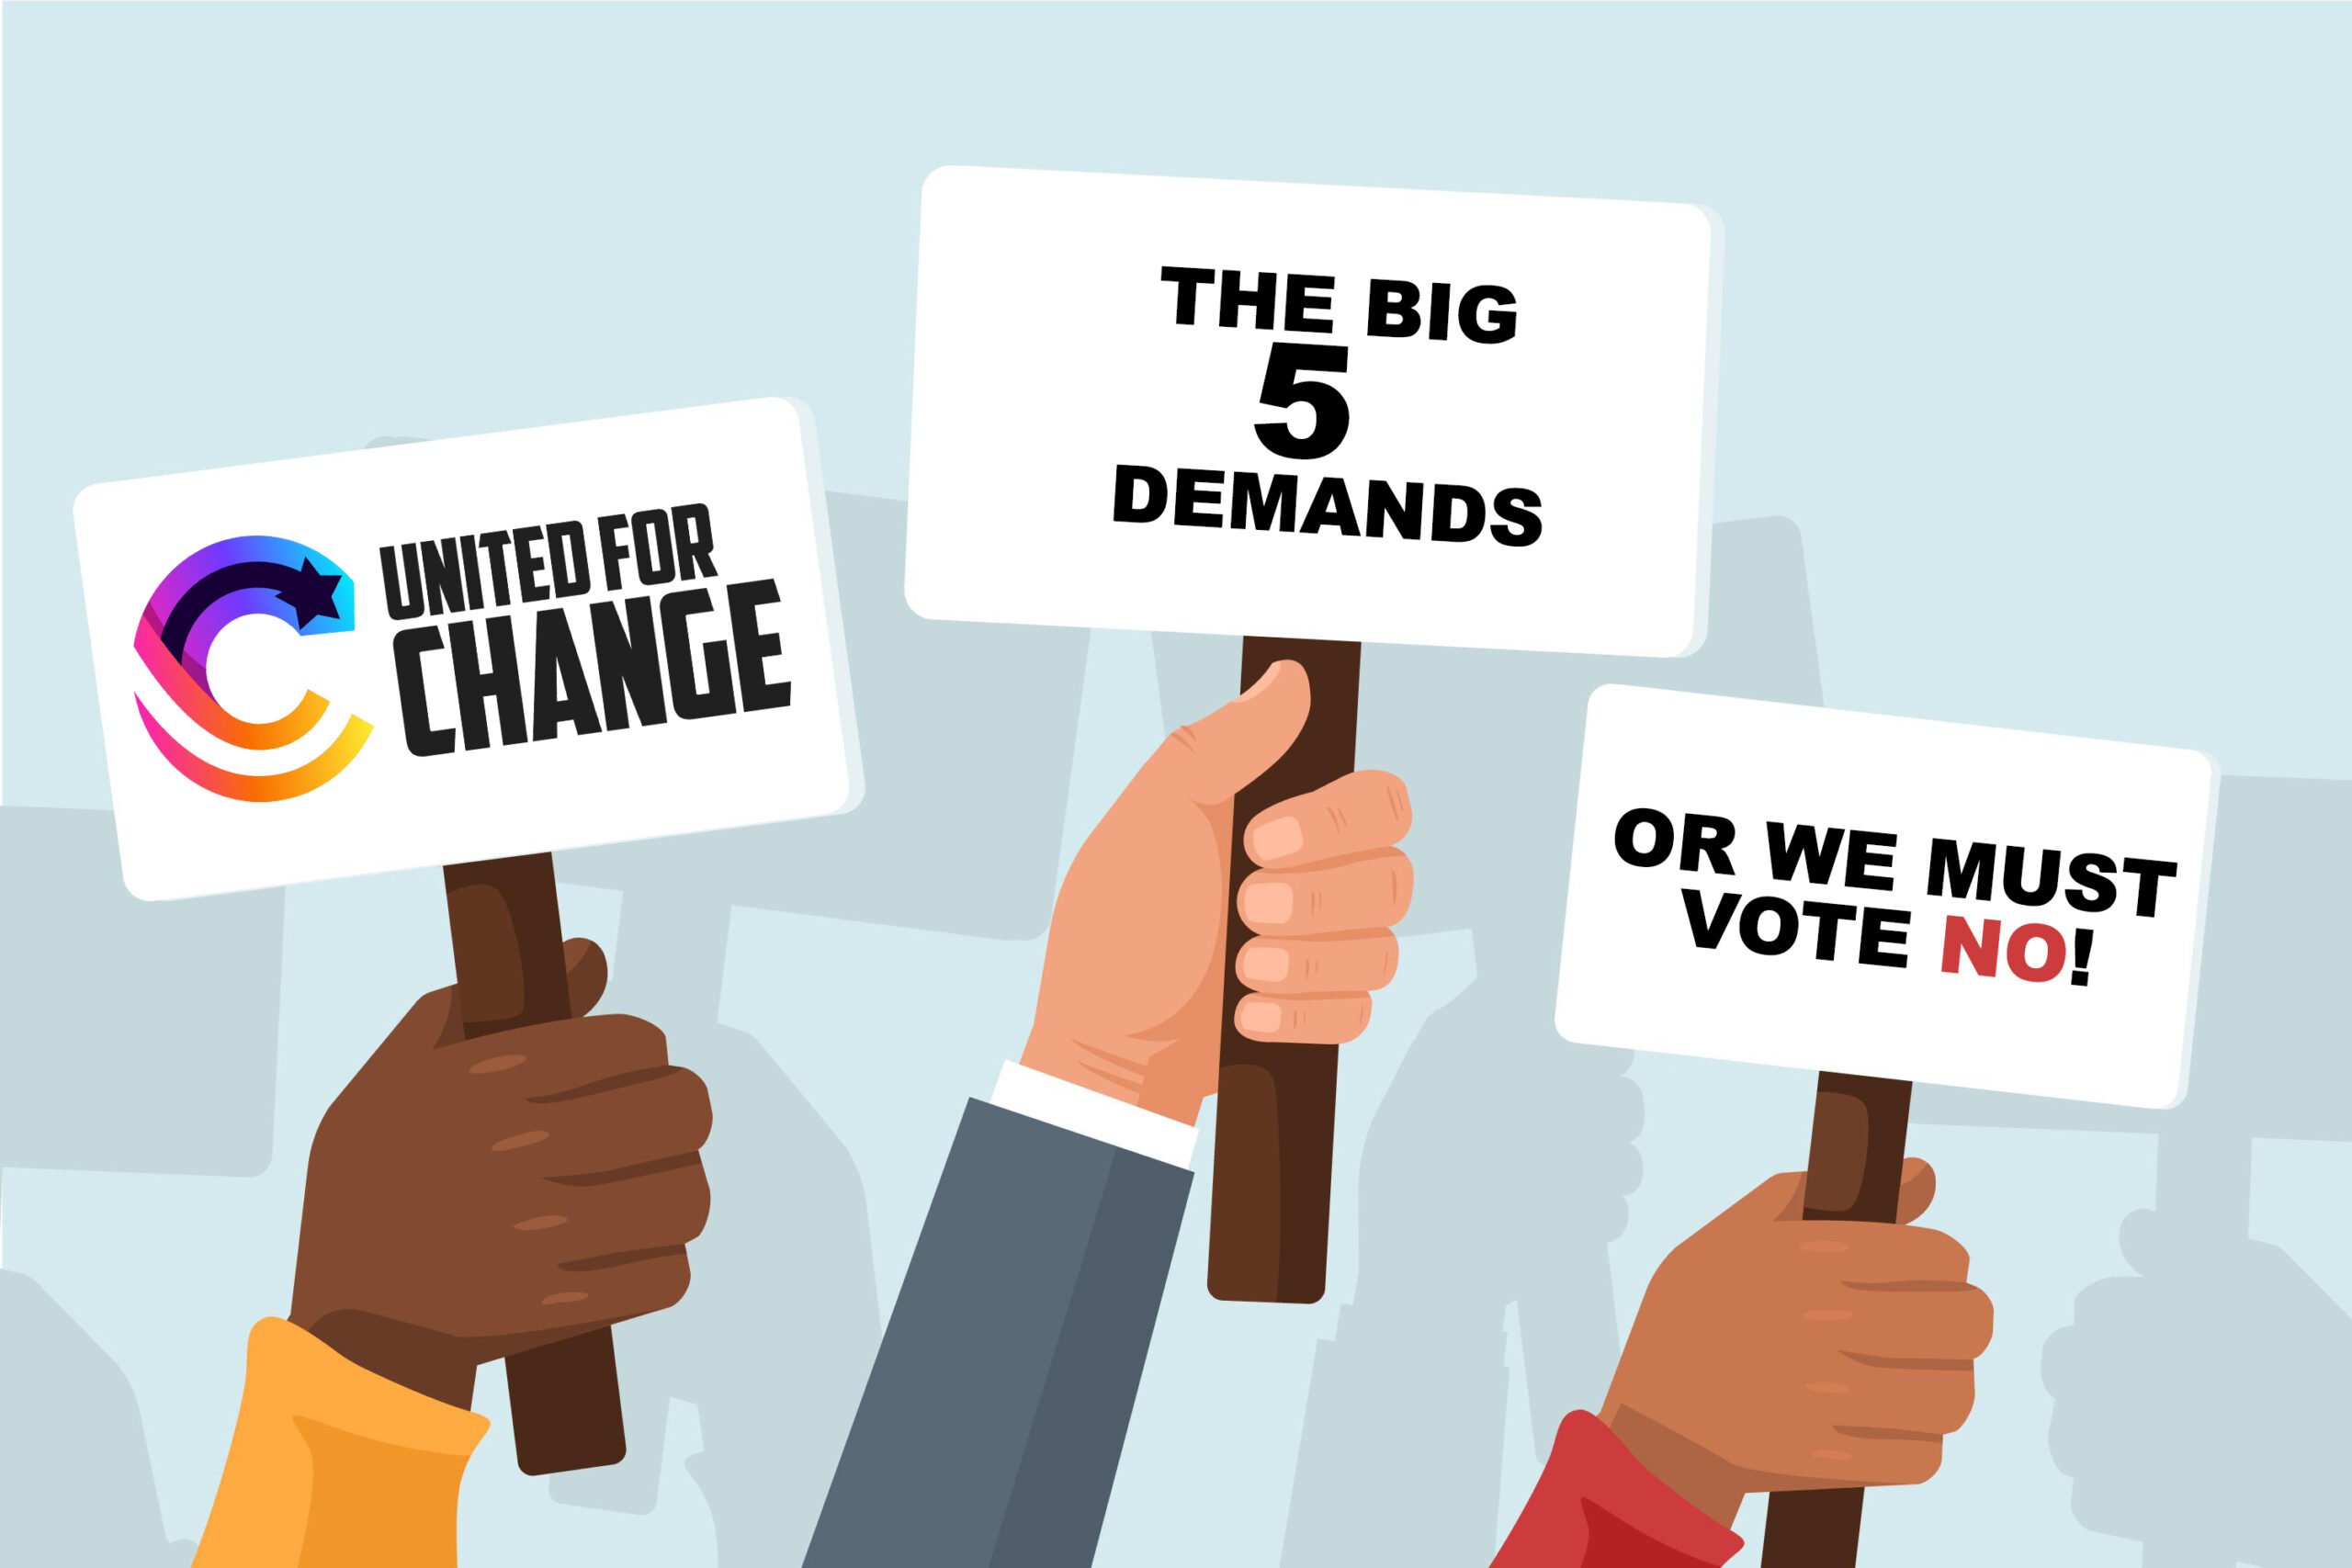  THE BIG 5 CONTRACT DEMANDS: United for Change Coalition Calls For a REAL Fair Contract